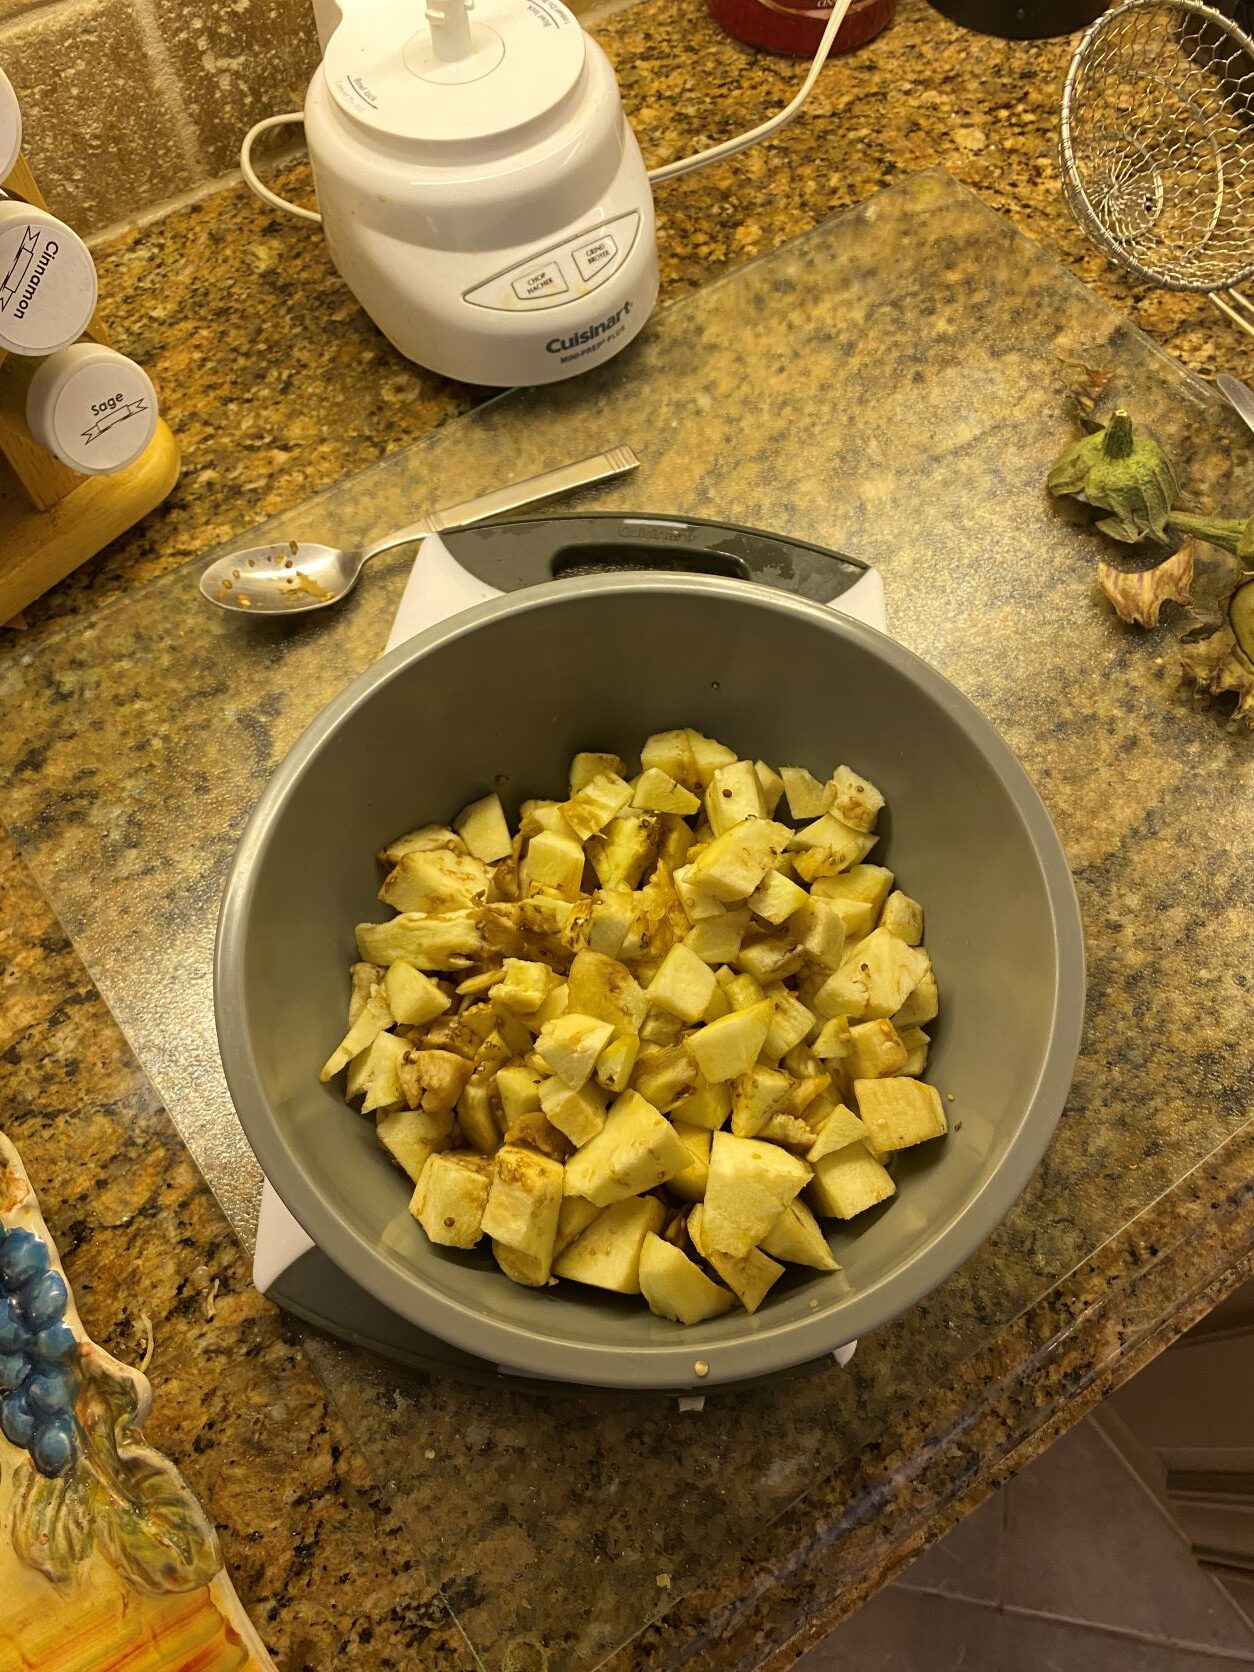 diced, boiled eggplant in a grey bowl